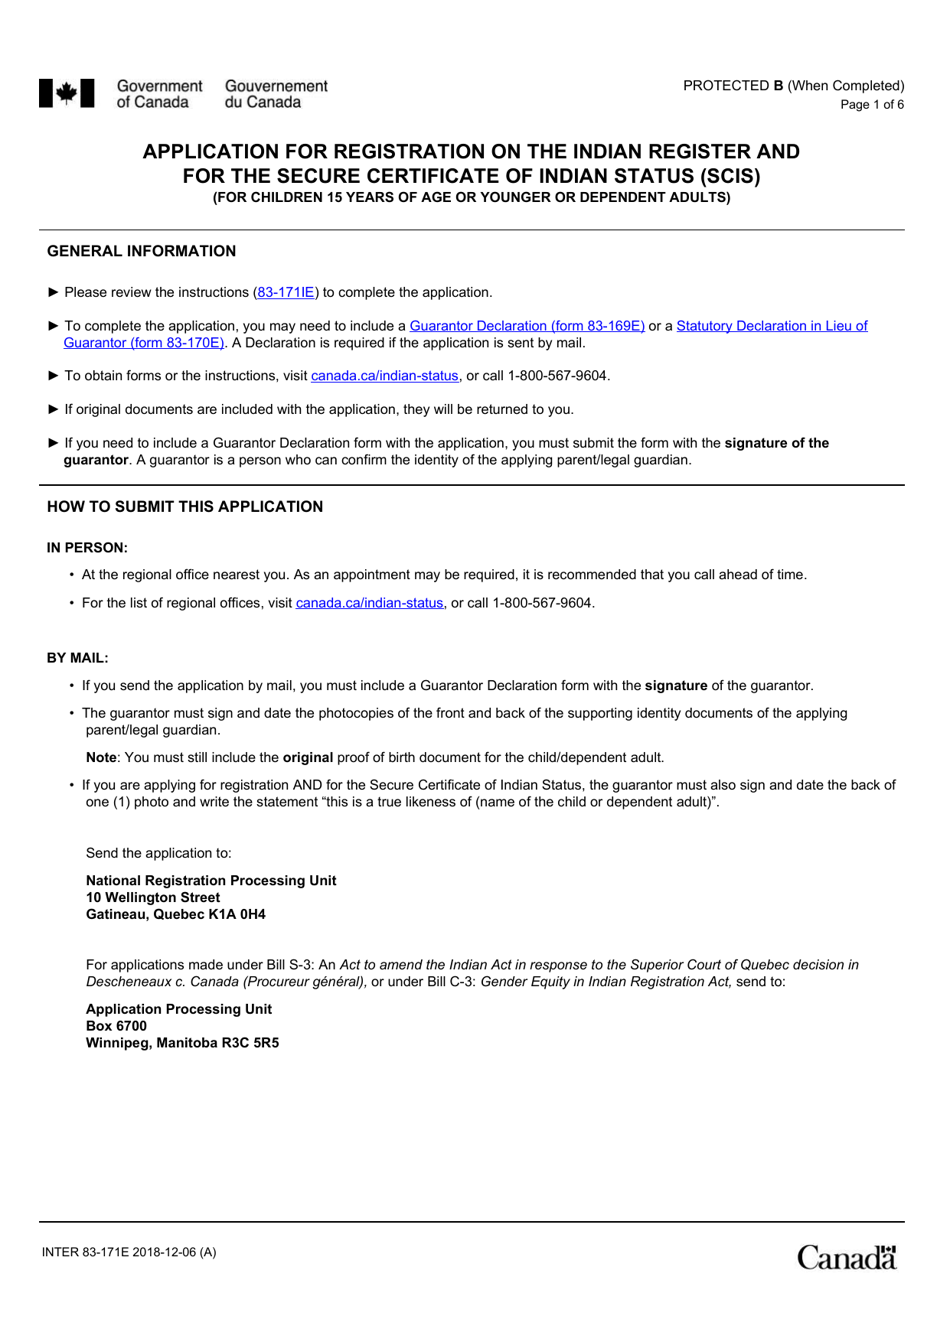 Form INTER83-171E Application for Registration on the Indian Register and for the Secure Certificate of Indian Status (Scis) (For Children 15 Years of Age or Younger or Dependent Adults) - Canada, Page 1